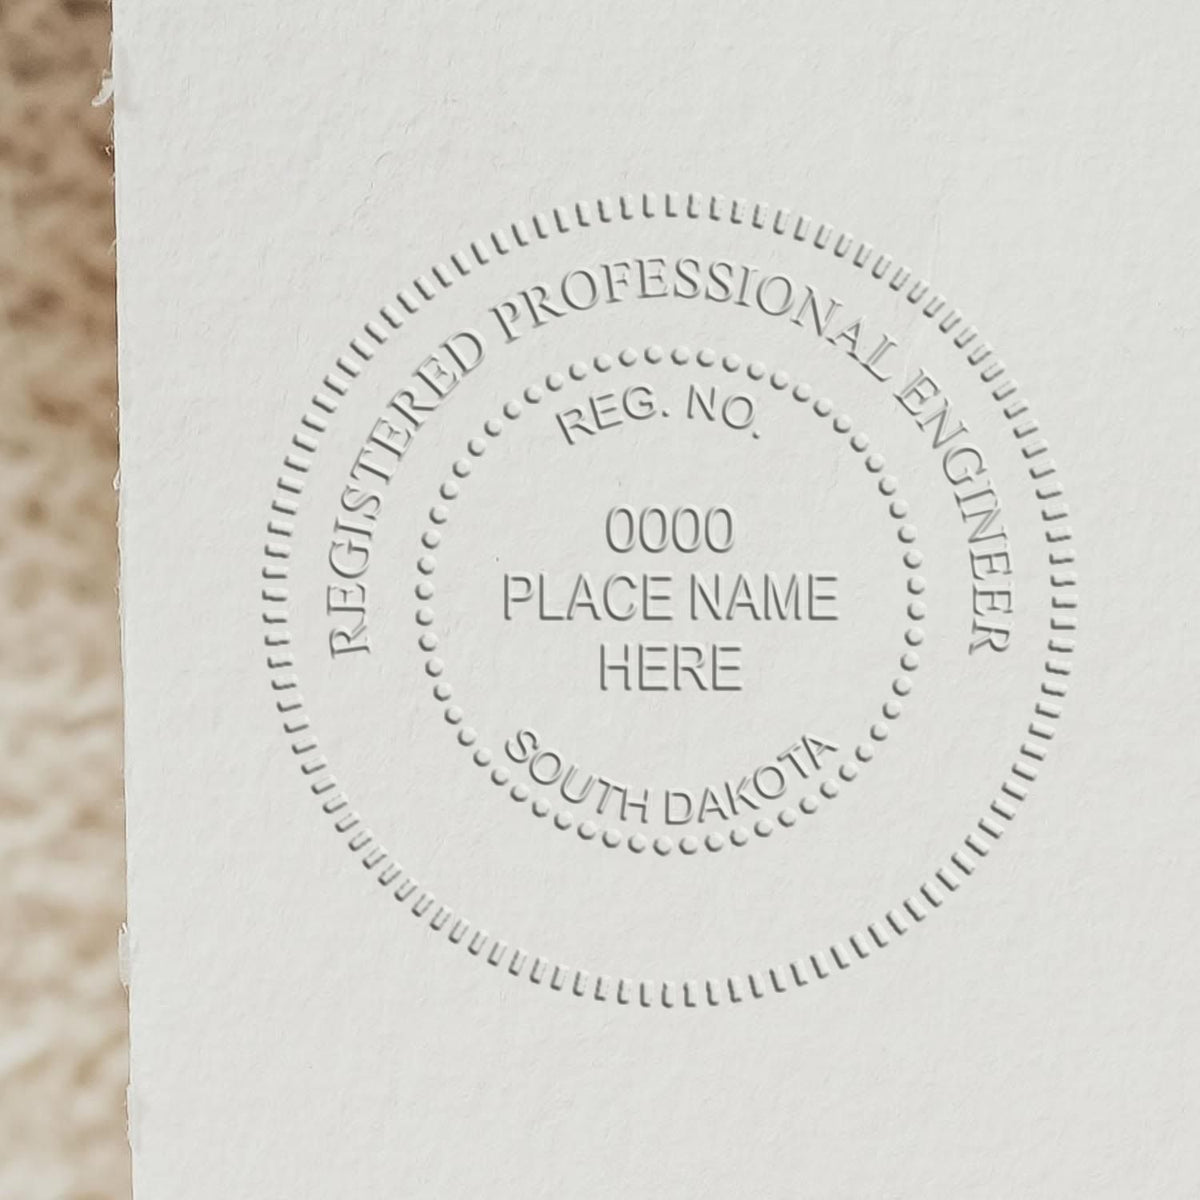 A stamped impression of the South Dakota Engineer Desk Seal in this stylish lifestyle photo, setting the tone for a unique and personalized product.